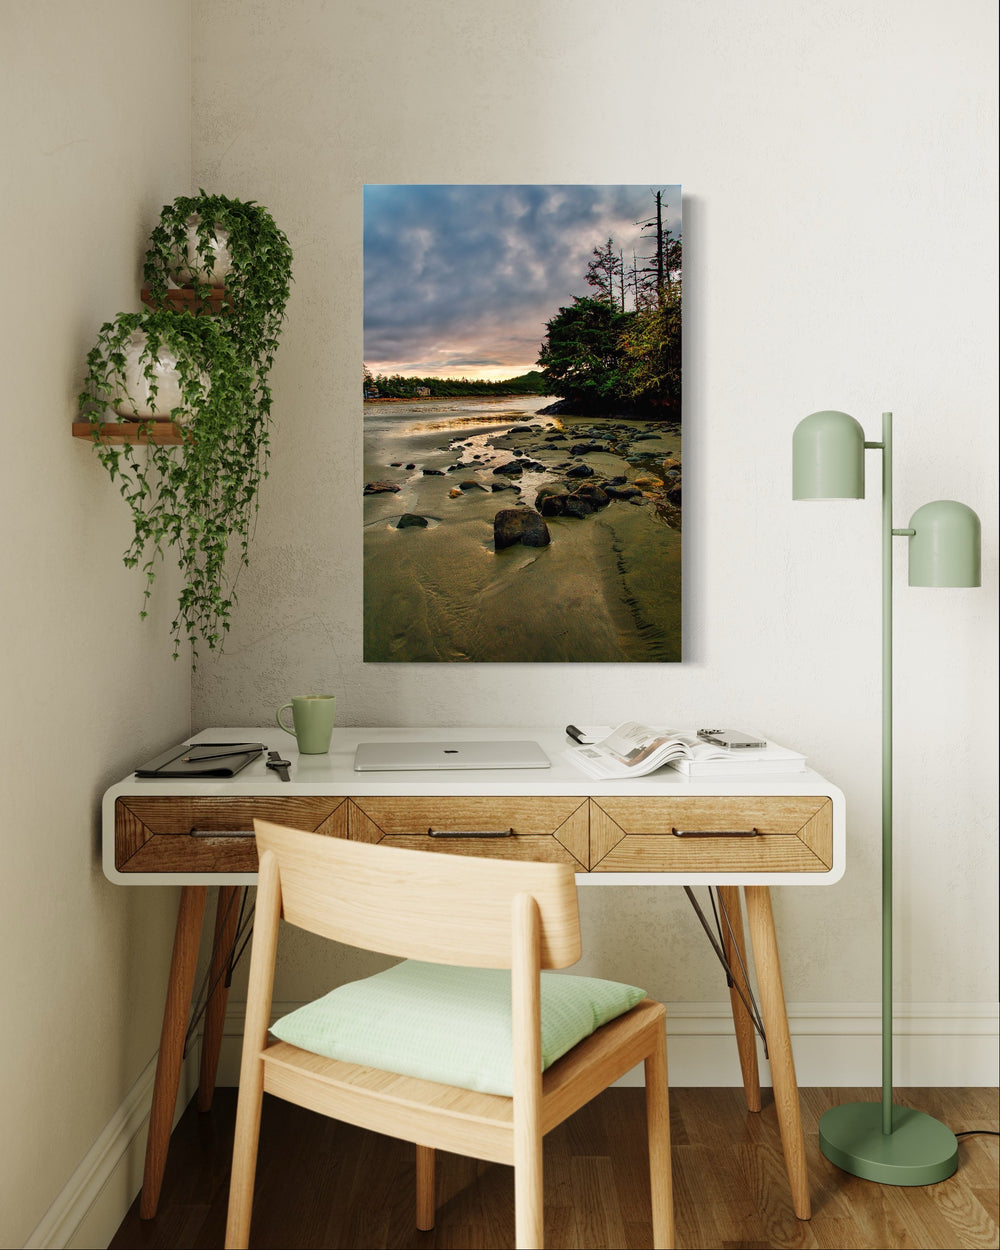 "Low Tide at Schooners Beach, Tofino" 16x24 Limited Edition 2nd of 3.